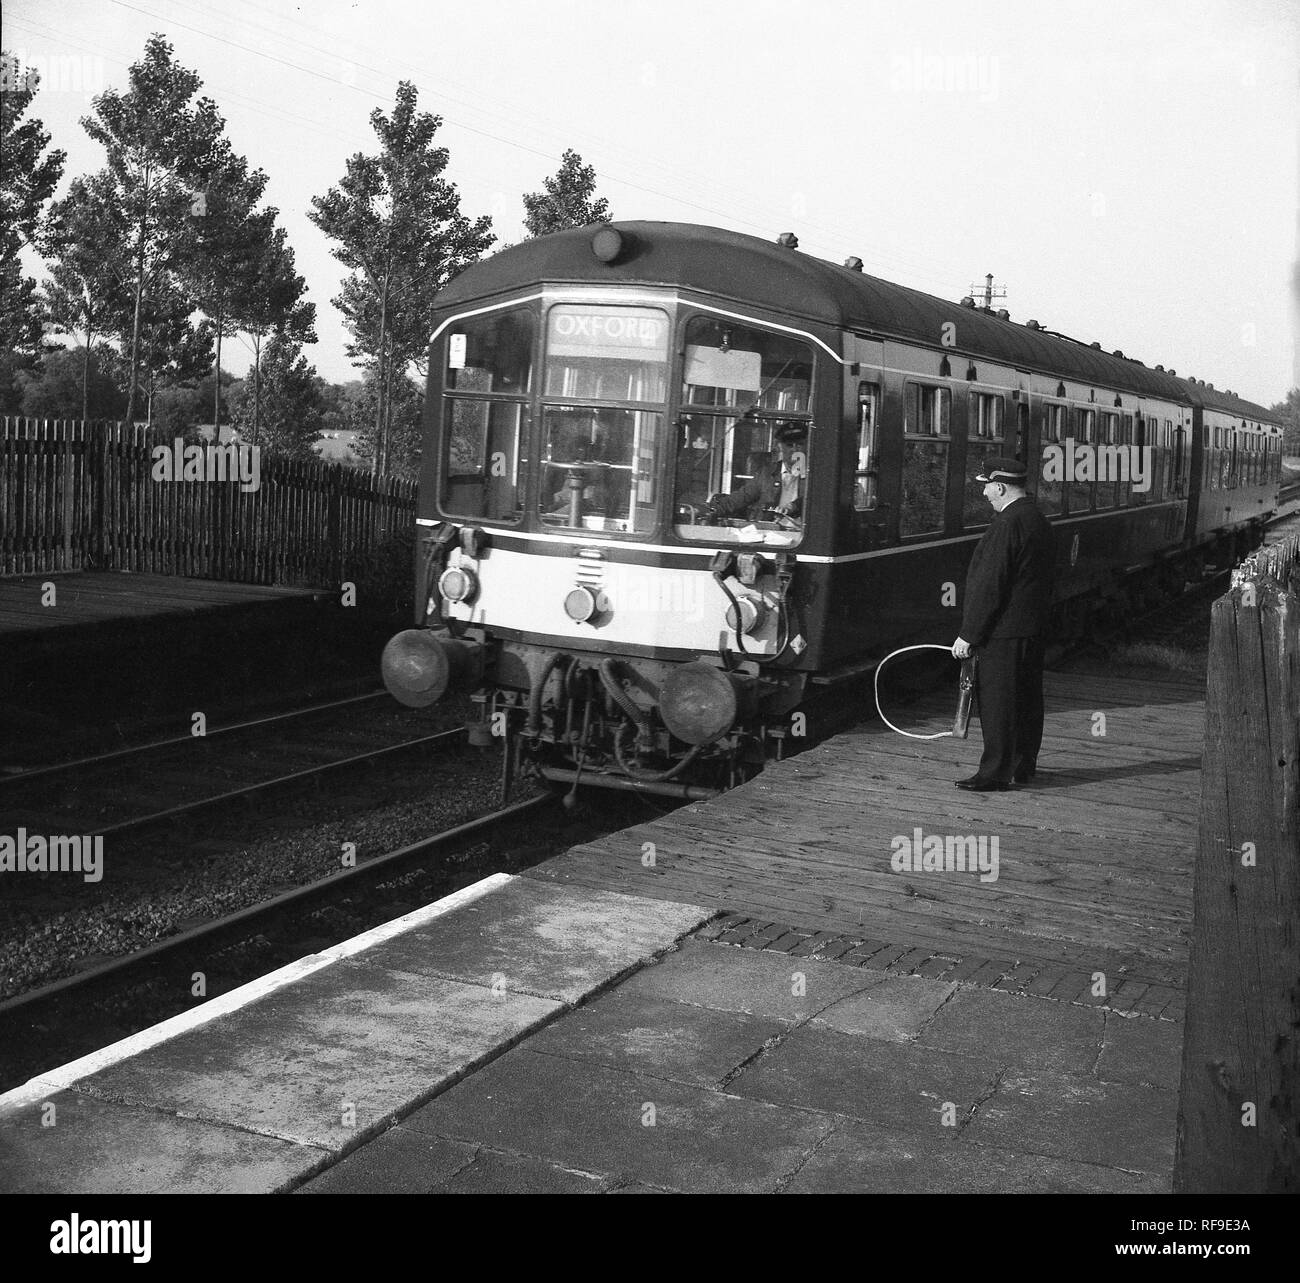 1970s, diesel train coming into a railway station with a waiting station guard standing on the wooden front part platform holding a metal tool, England, UK. Stock Photo